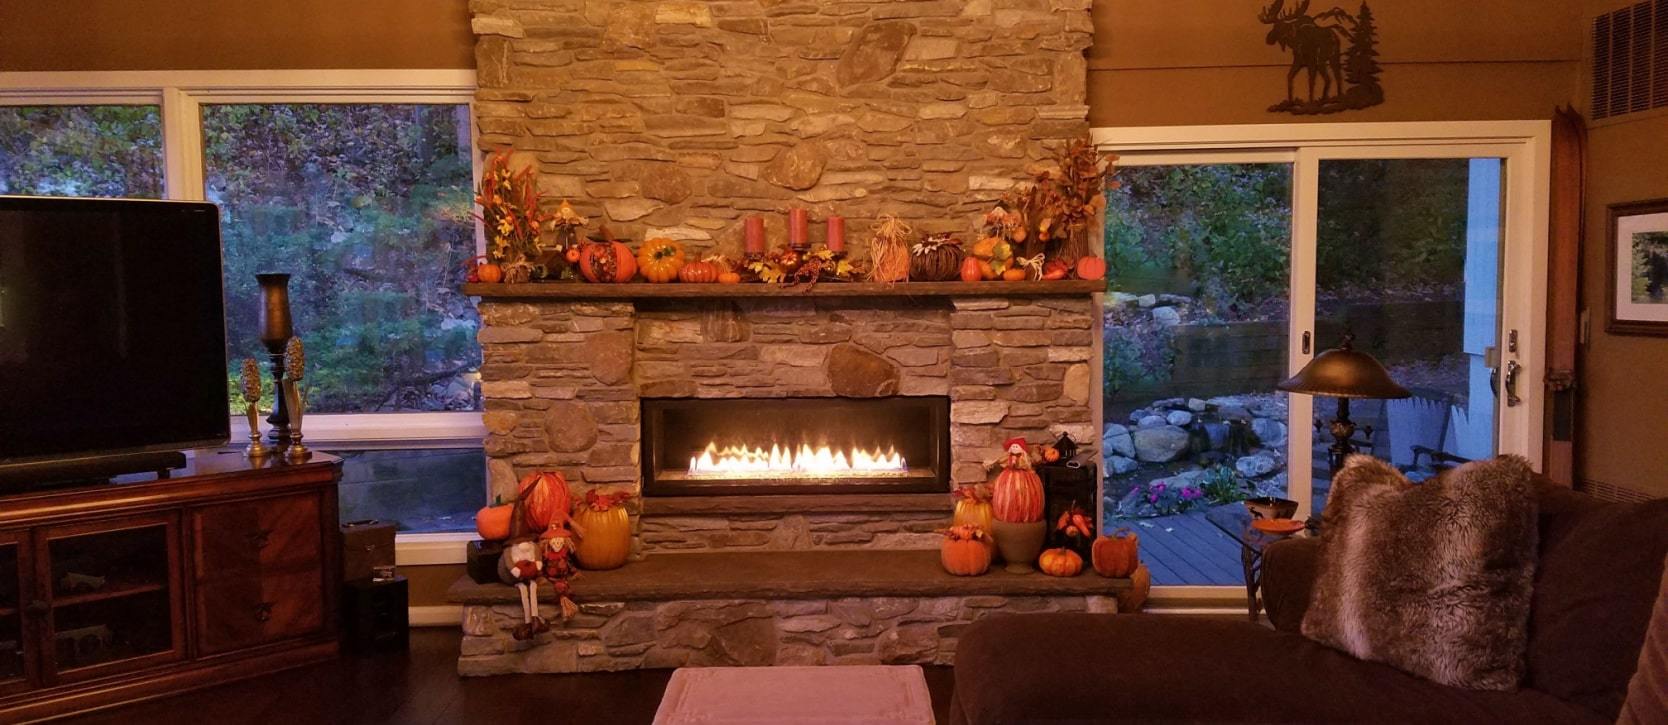 The interior of a cabin in the fall season